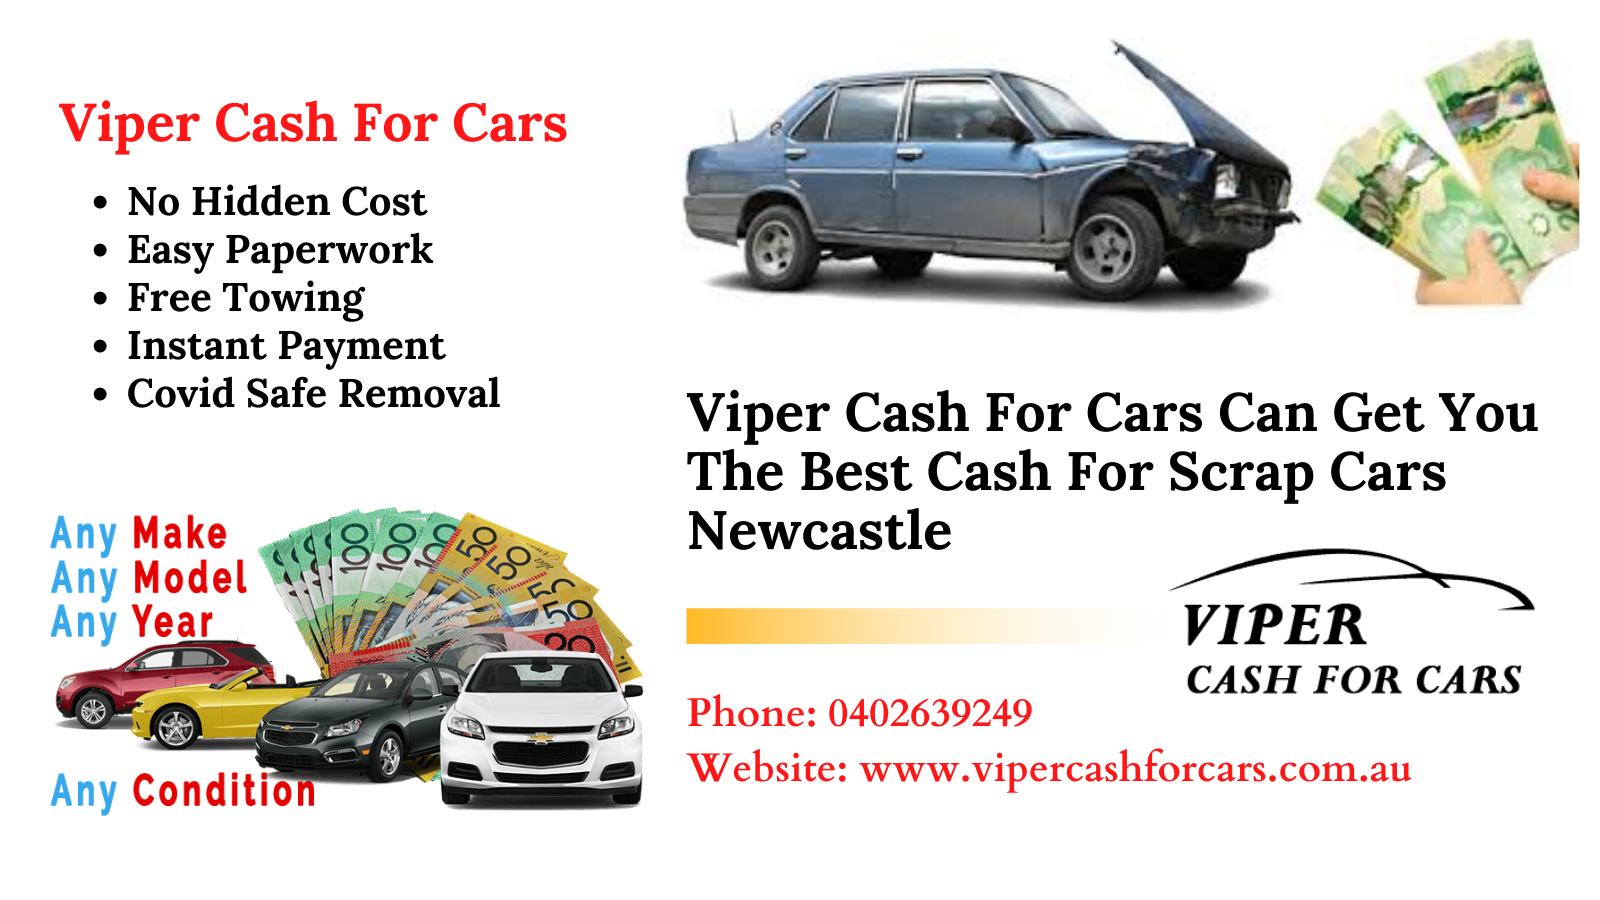 Viper Cash For Cars Can Get You The Best Cash For Scrap Cars Newcastle